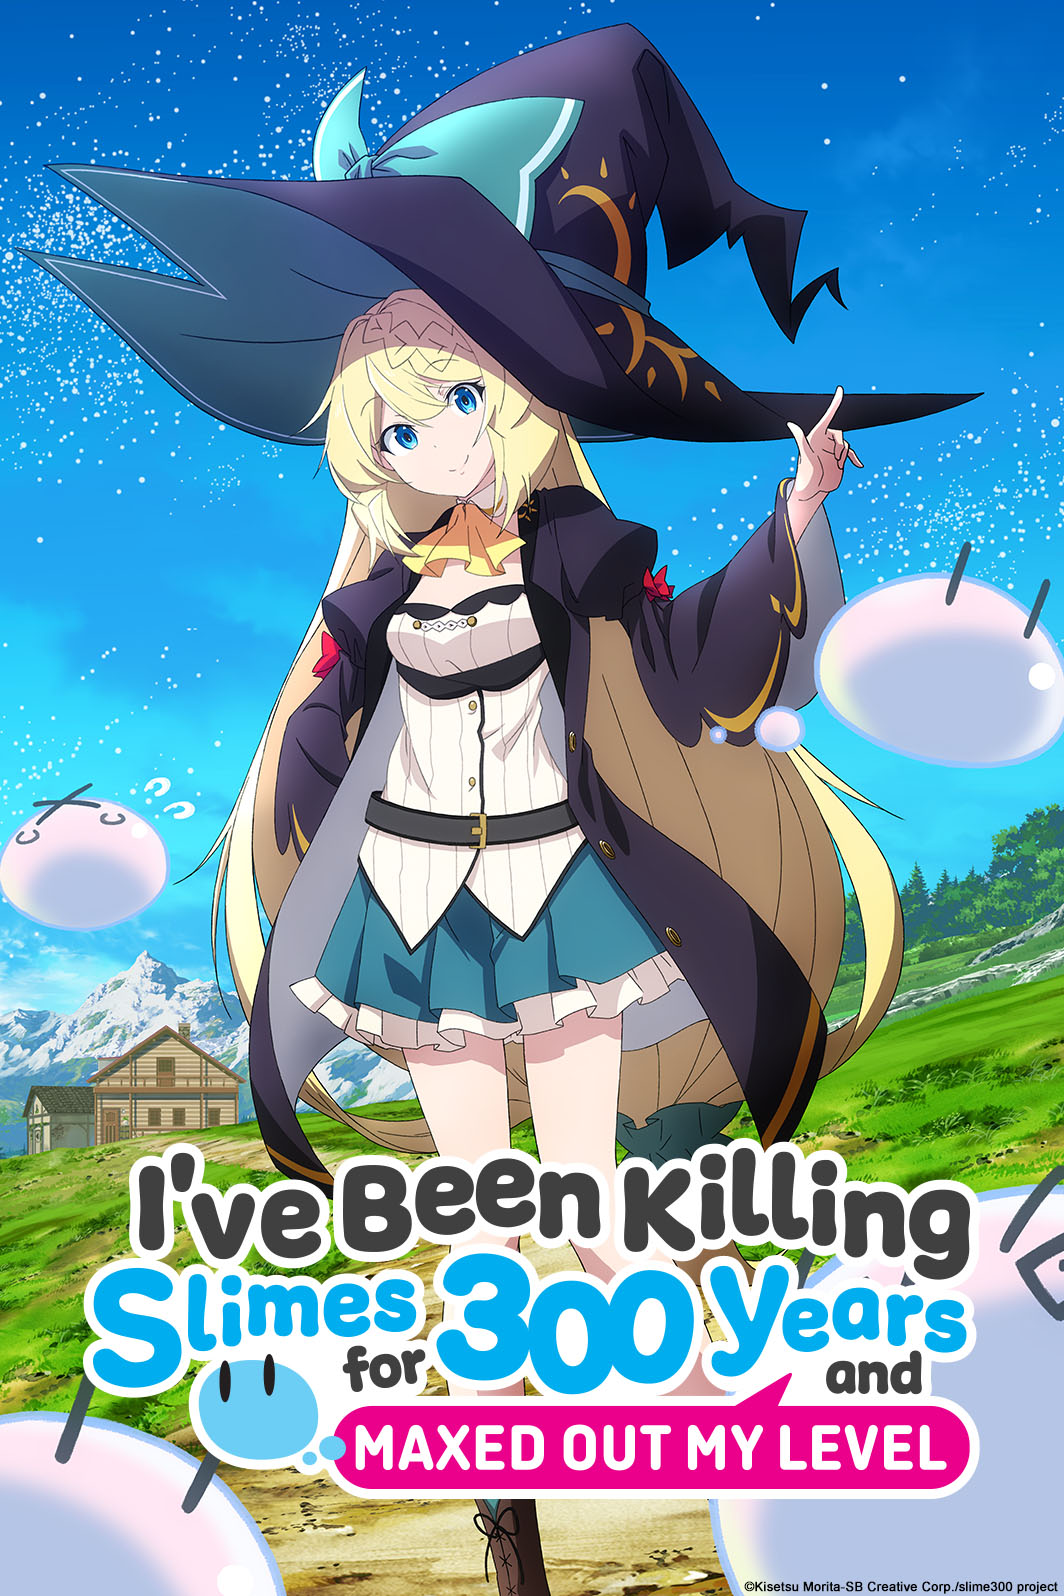 Crunchyroll - Ive Been Killing Slimes for 300 Years and 